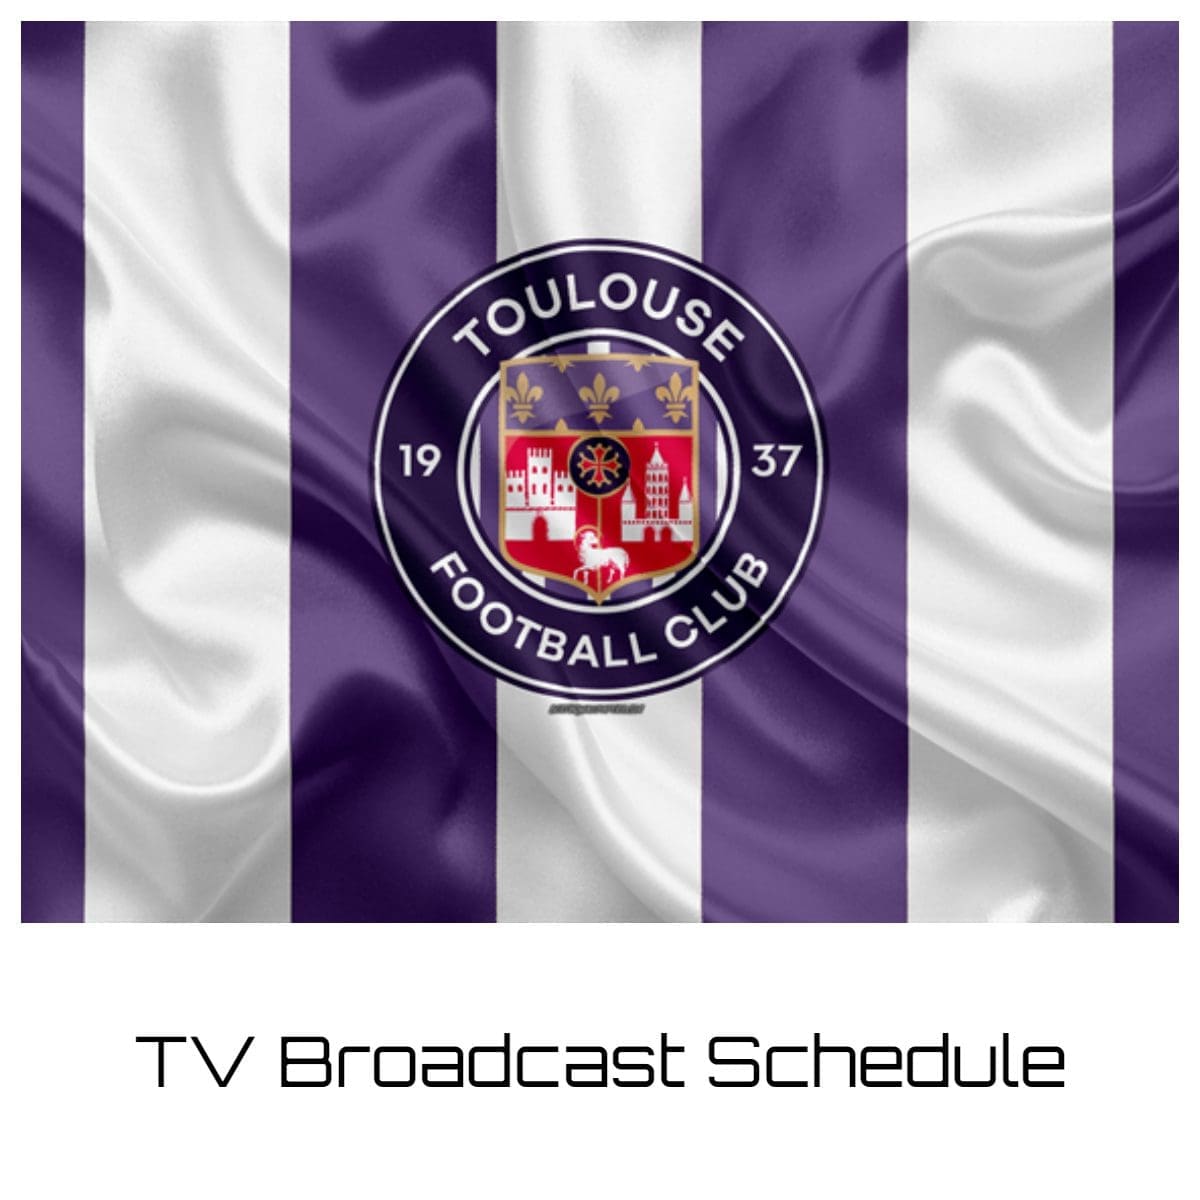 Toulouse TV Broadcast Schedule